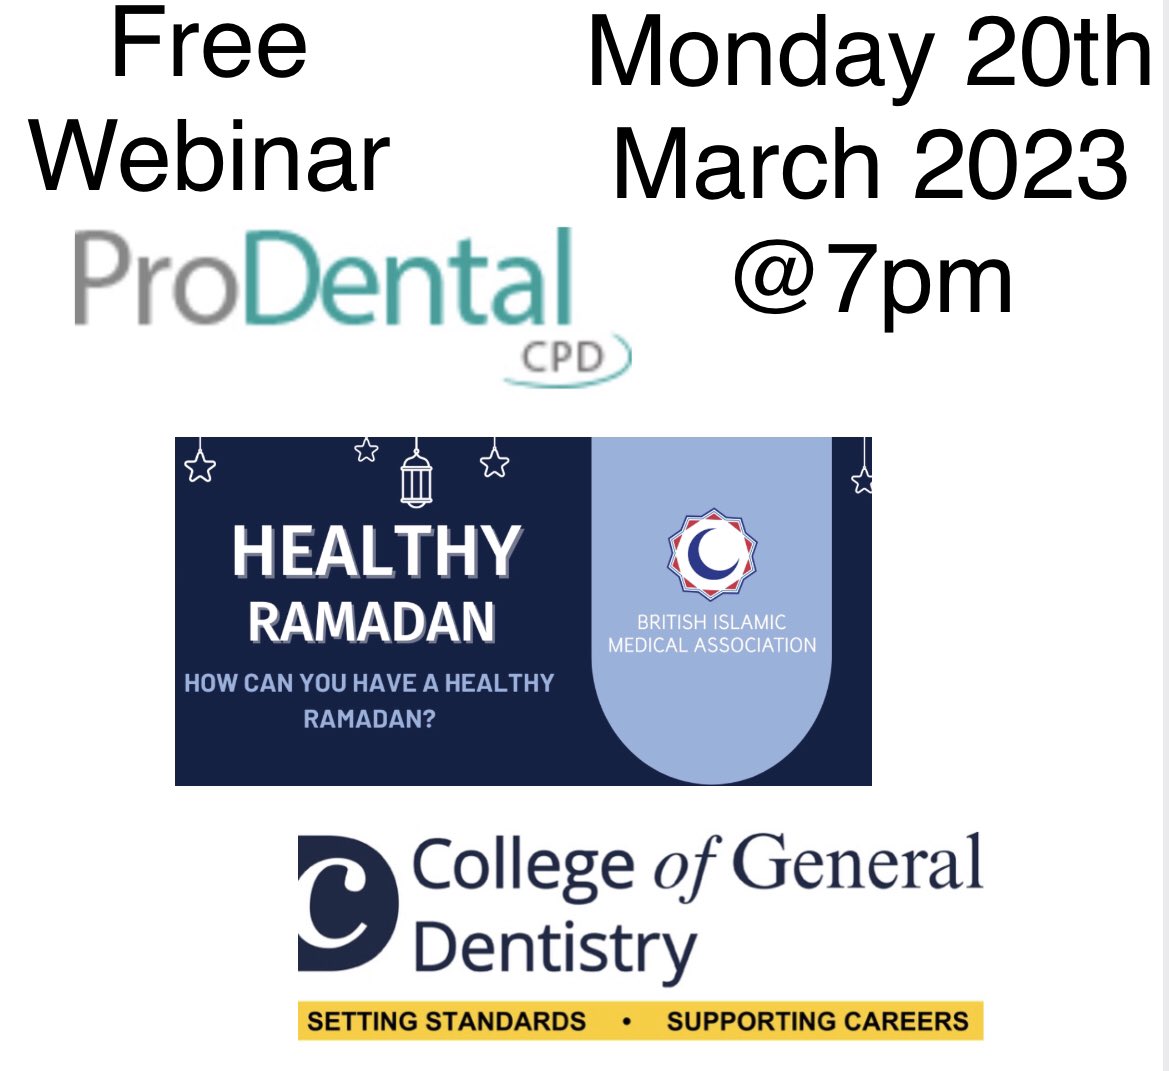 @ProDentalCPD @CGDent @SBDNuk @TheBDA @BADNUK @FGDP_UK @ADI_dental @ITIUKIRELAND Everyone’s welcome to the discussion with a great panel! GM LDC Chair & Principle Dentist Mohsan Ahmad @CGDent Hygienist Sarah Hill , London Dental Academy’s Dr ShihabRomeed , @BritishIMA &orthodontist Dr Nadia Ahmed , Emergency dentist Amber Hasnain and GP Dr Mateen Diwani